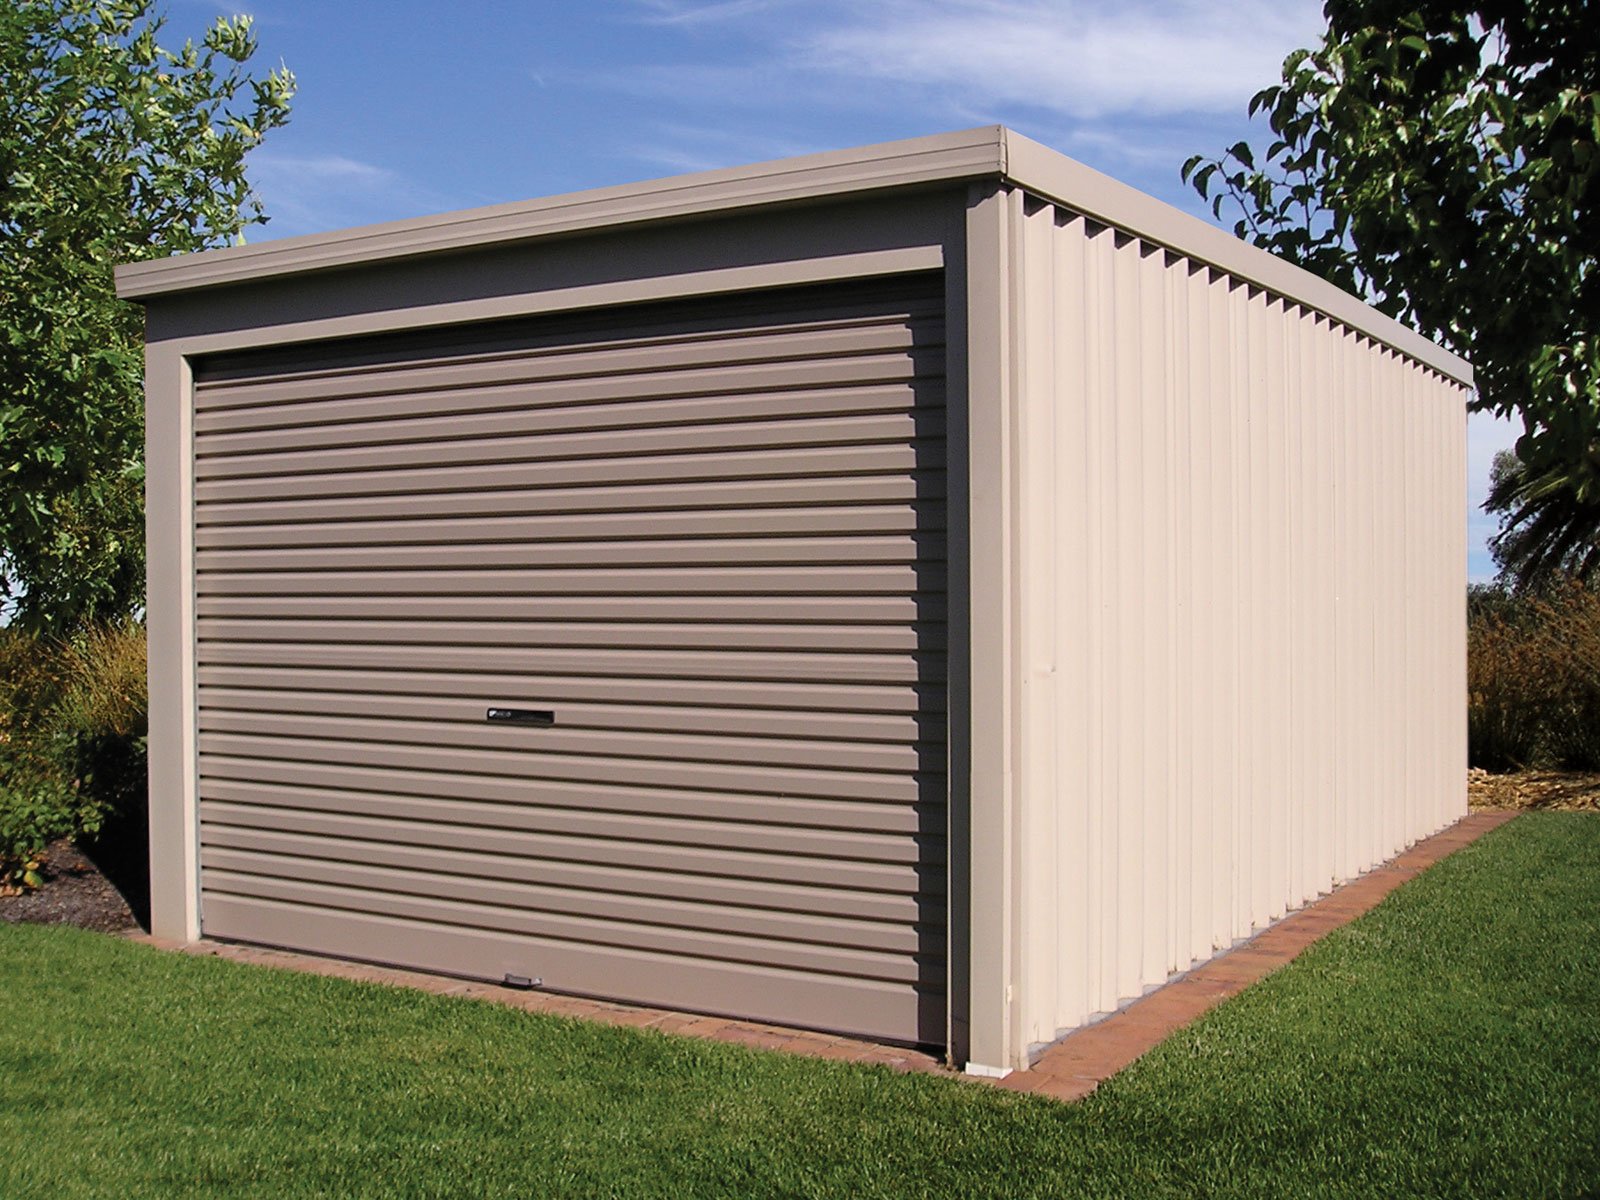 Flat Roof Shed Stratco Bank2home Com